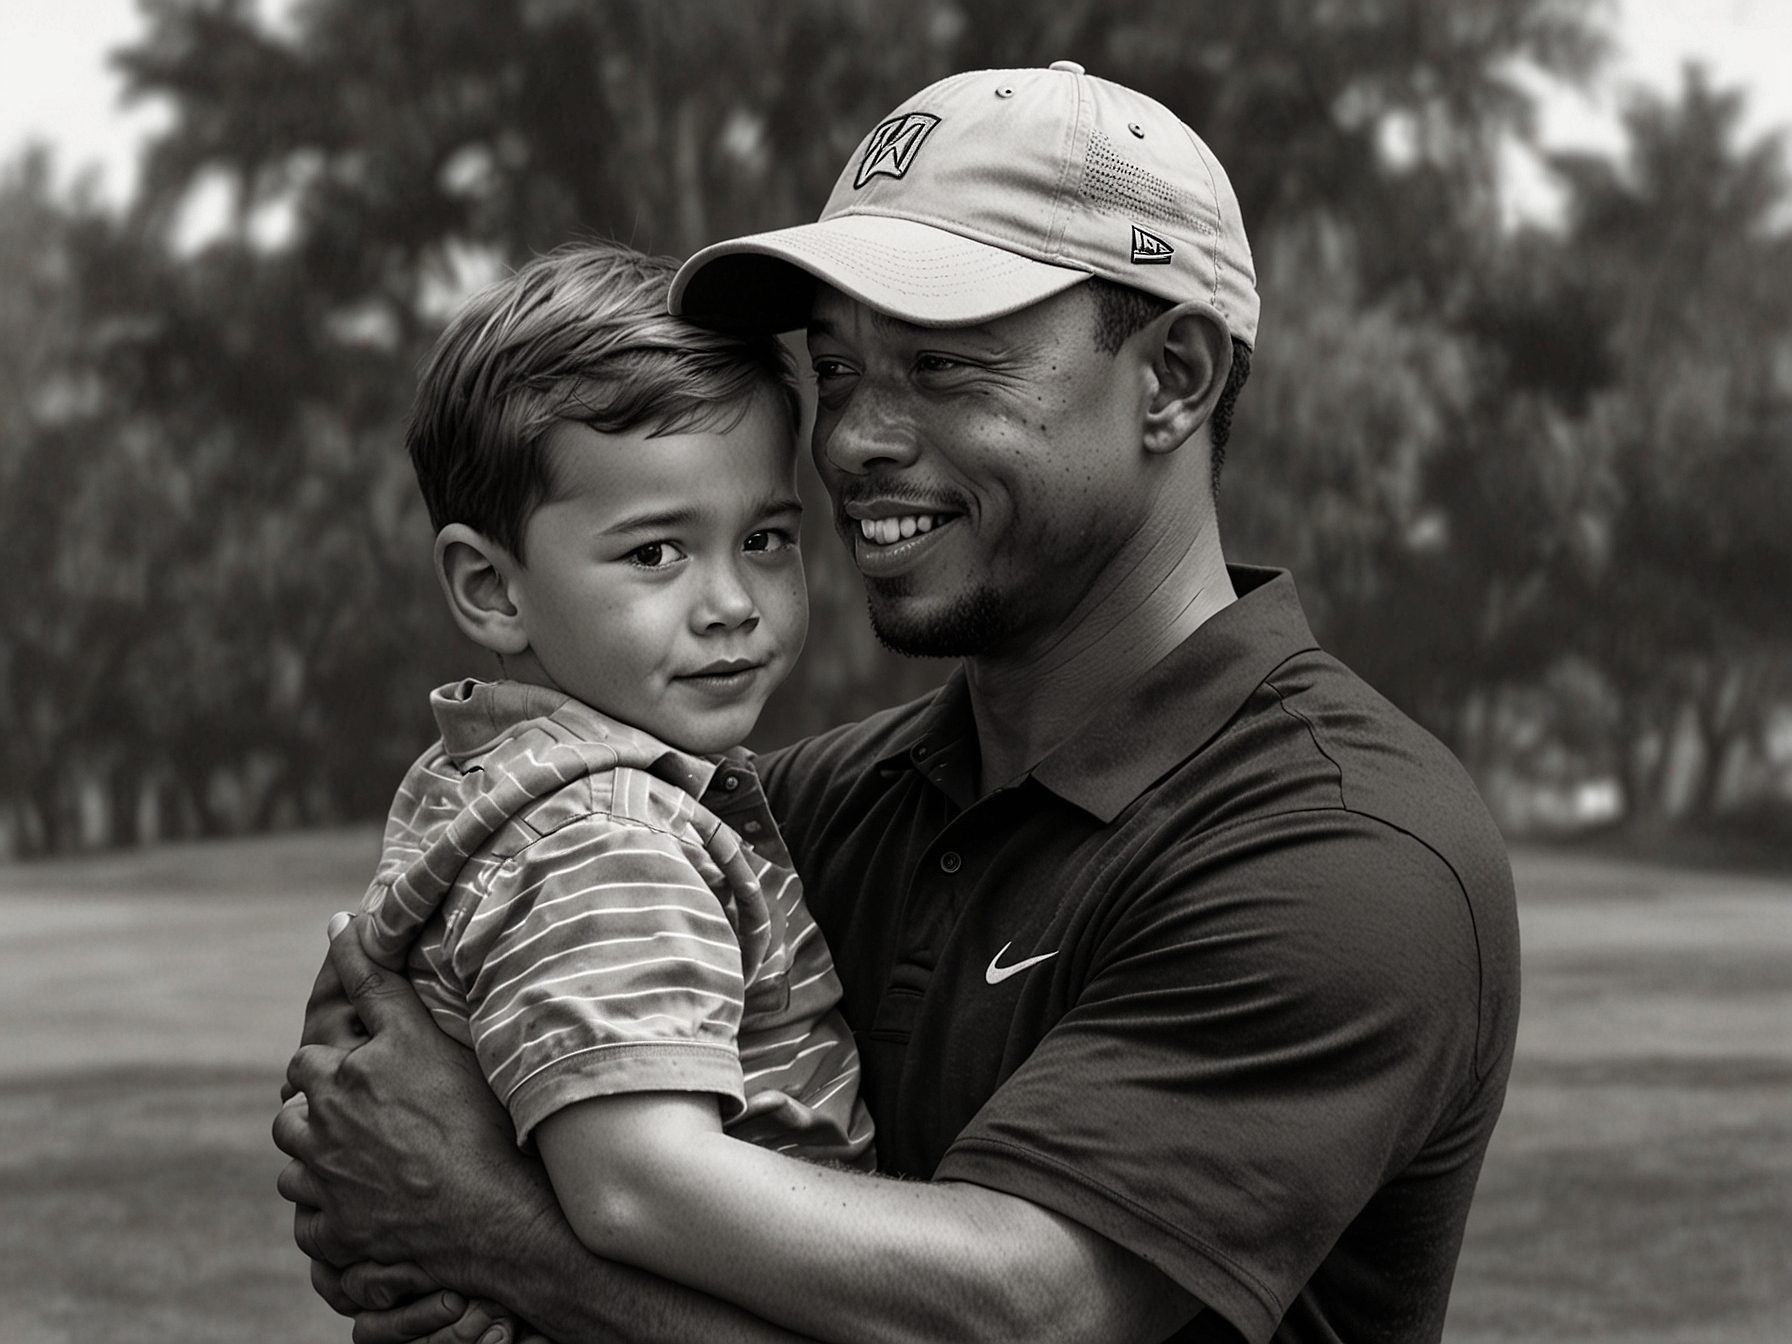 Tiger Woods warmly embraces his son, Charlie, on the golf course, illustrating their strong father-son bond and the support propelling Charlie's burgeoning career.